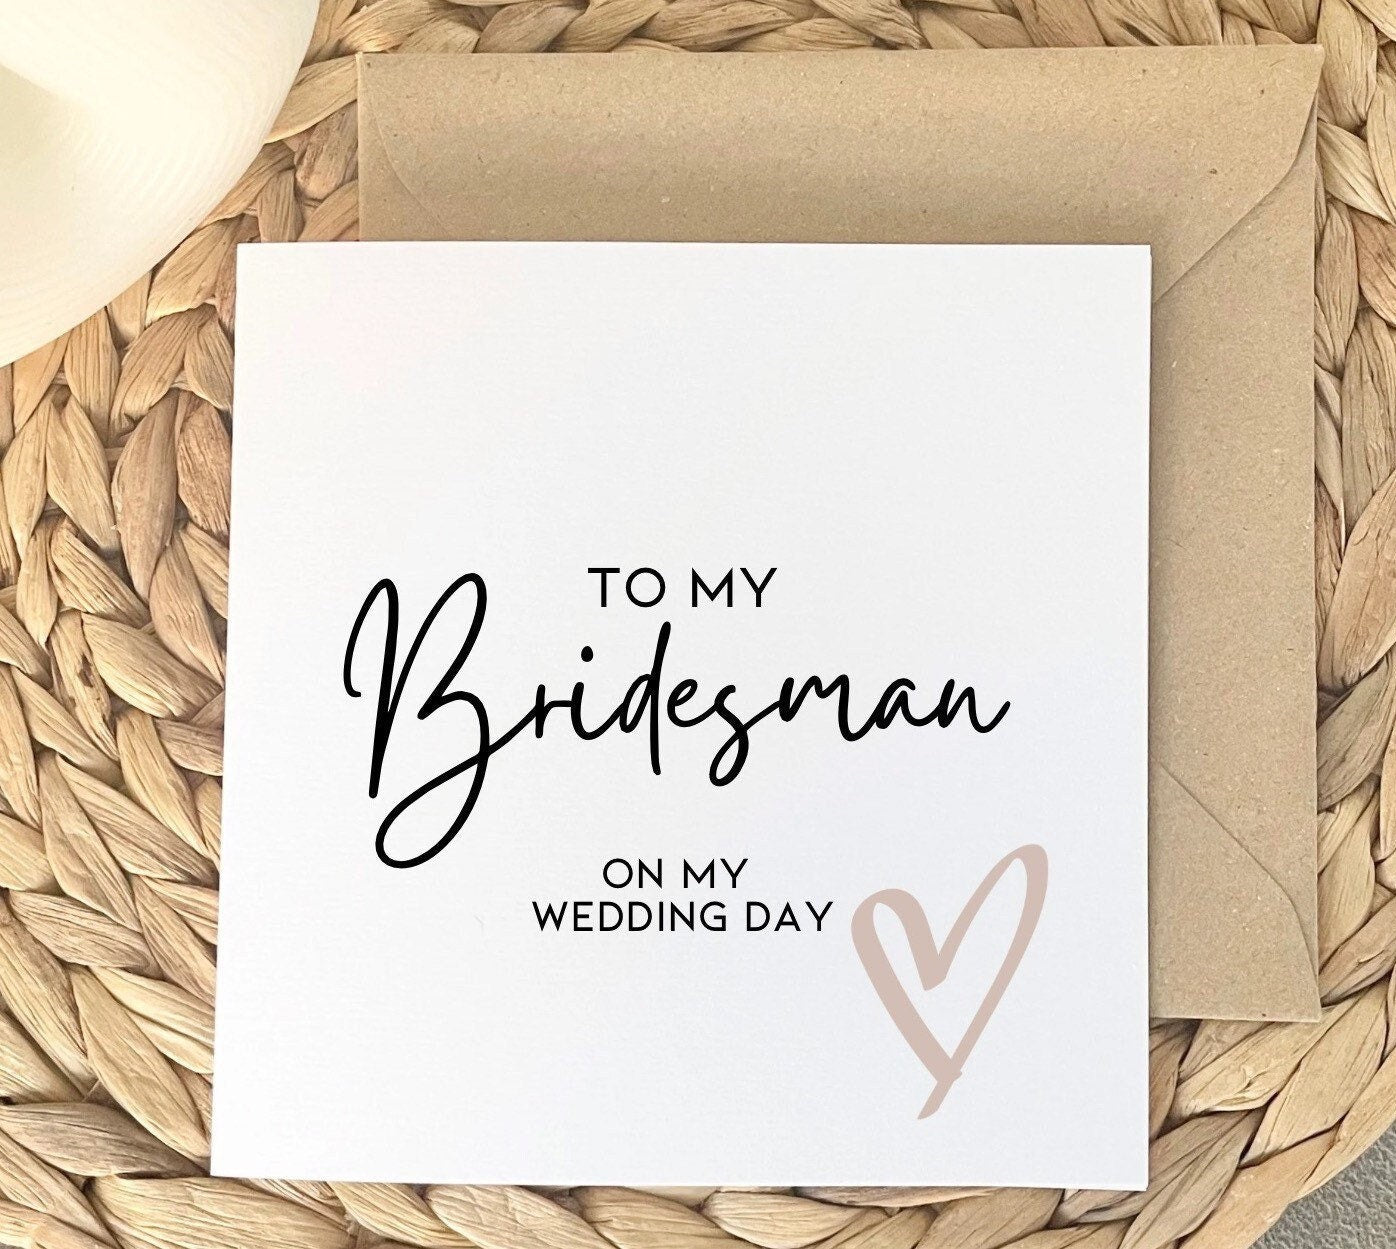 To my Bridesman on my wedding day card to say thank you for being my bridesman, cards from the bride to her male bestie